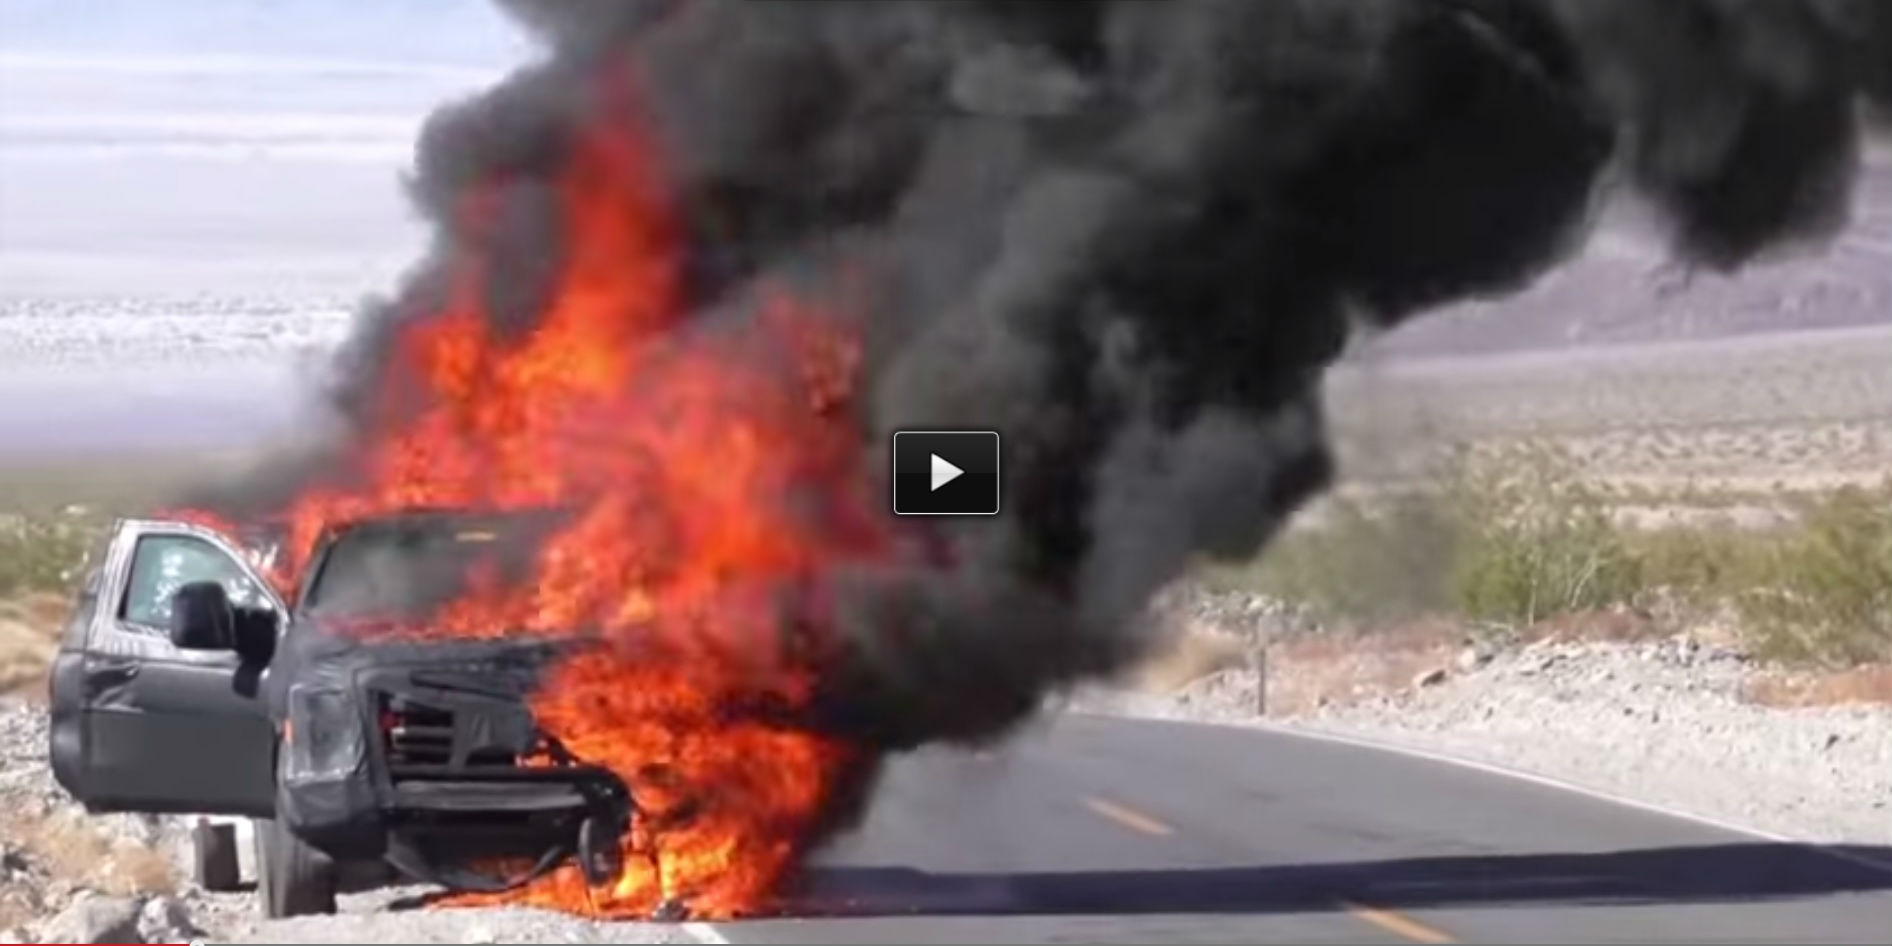 2016 Ford Super Duty prototype on fireFord Super Duty prototype on fire